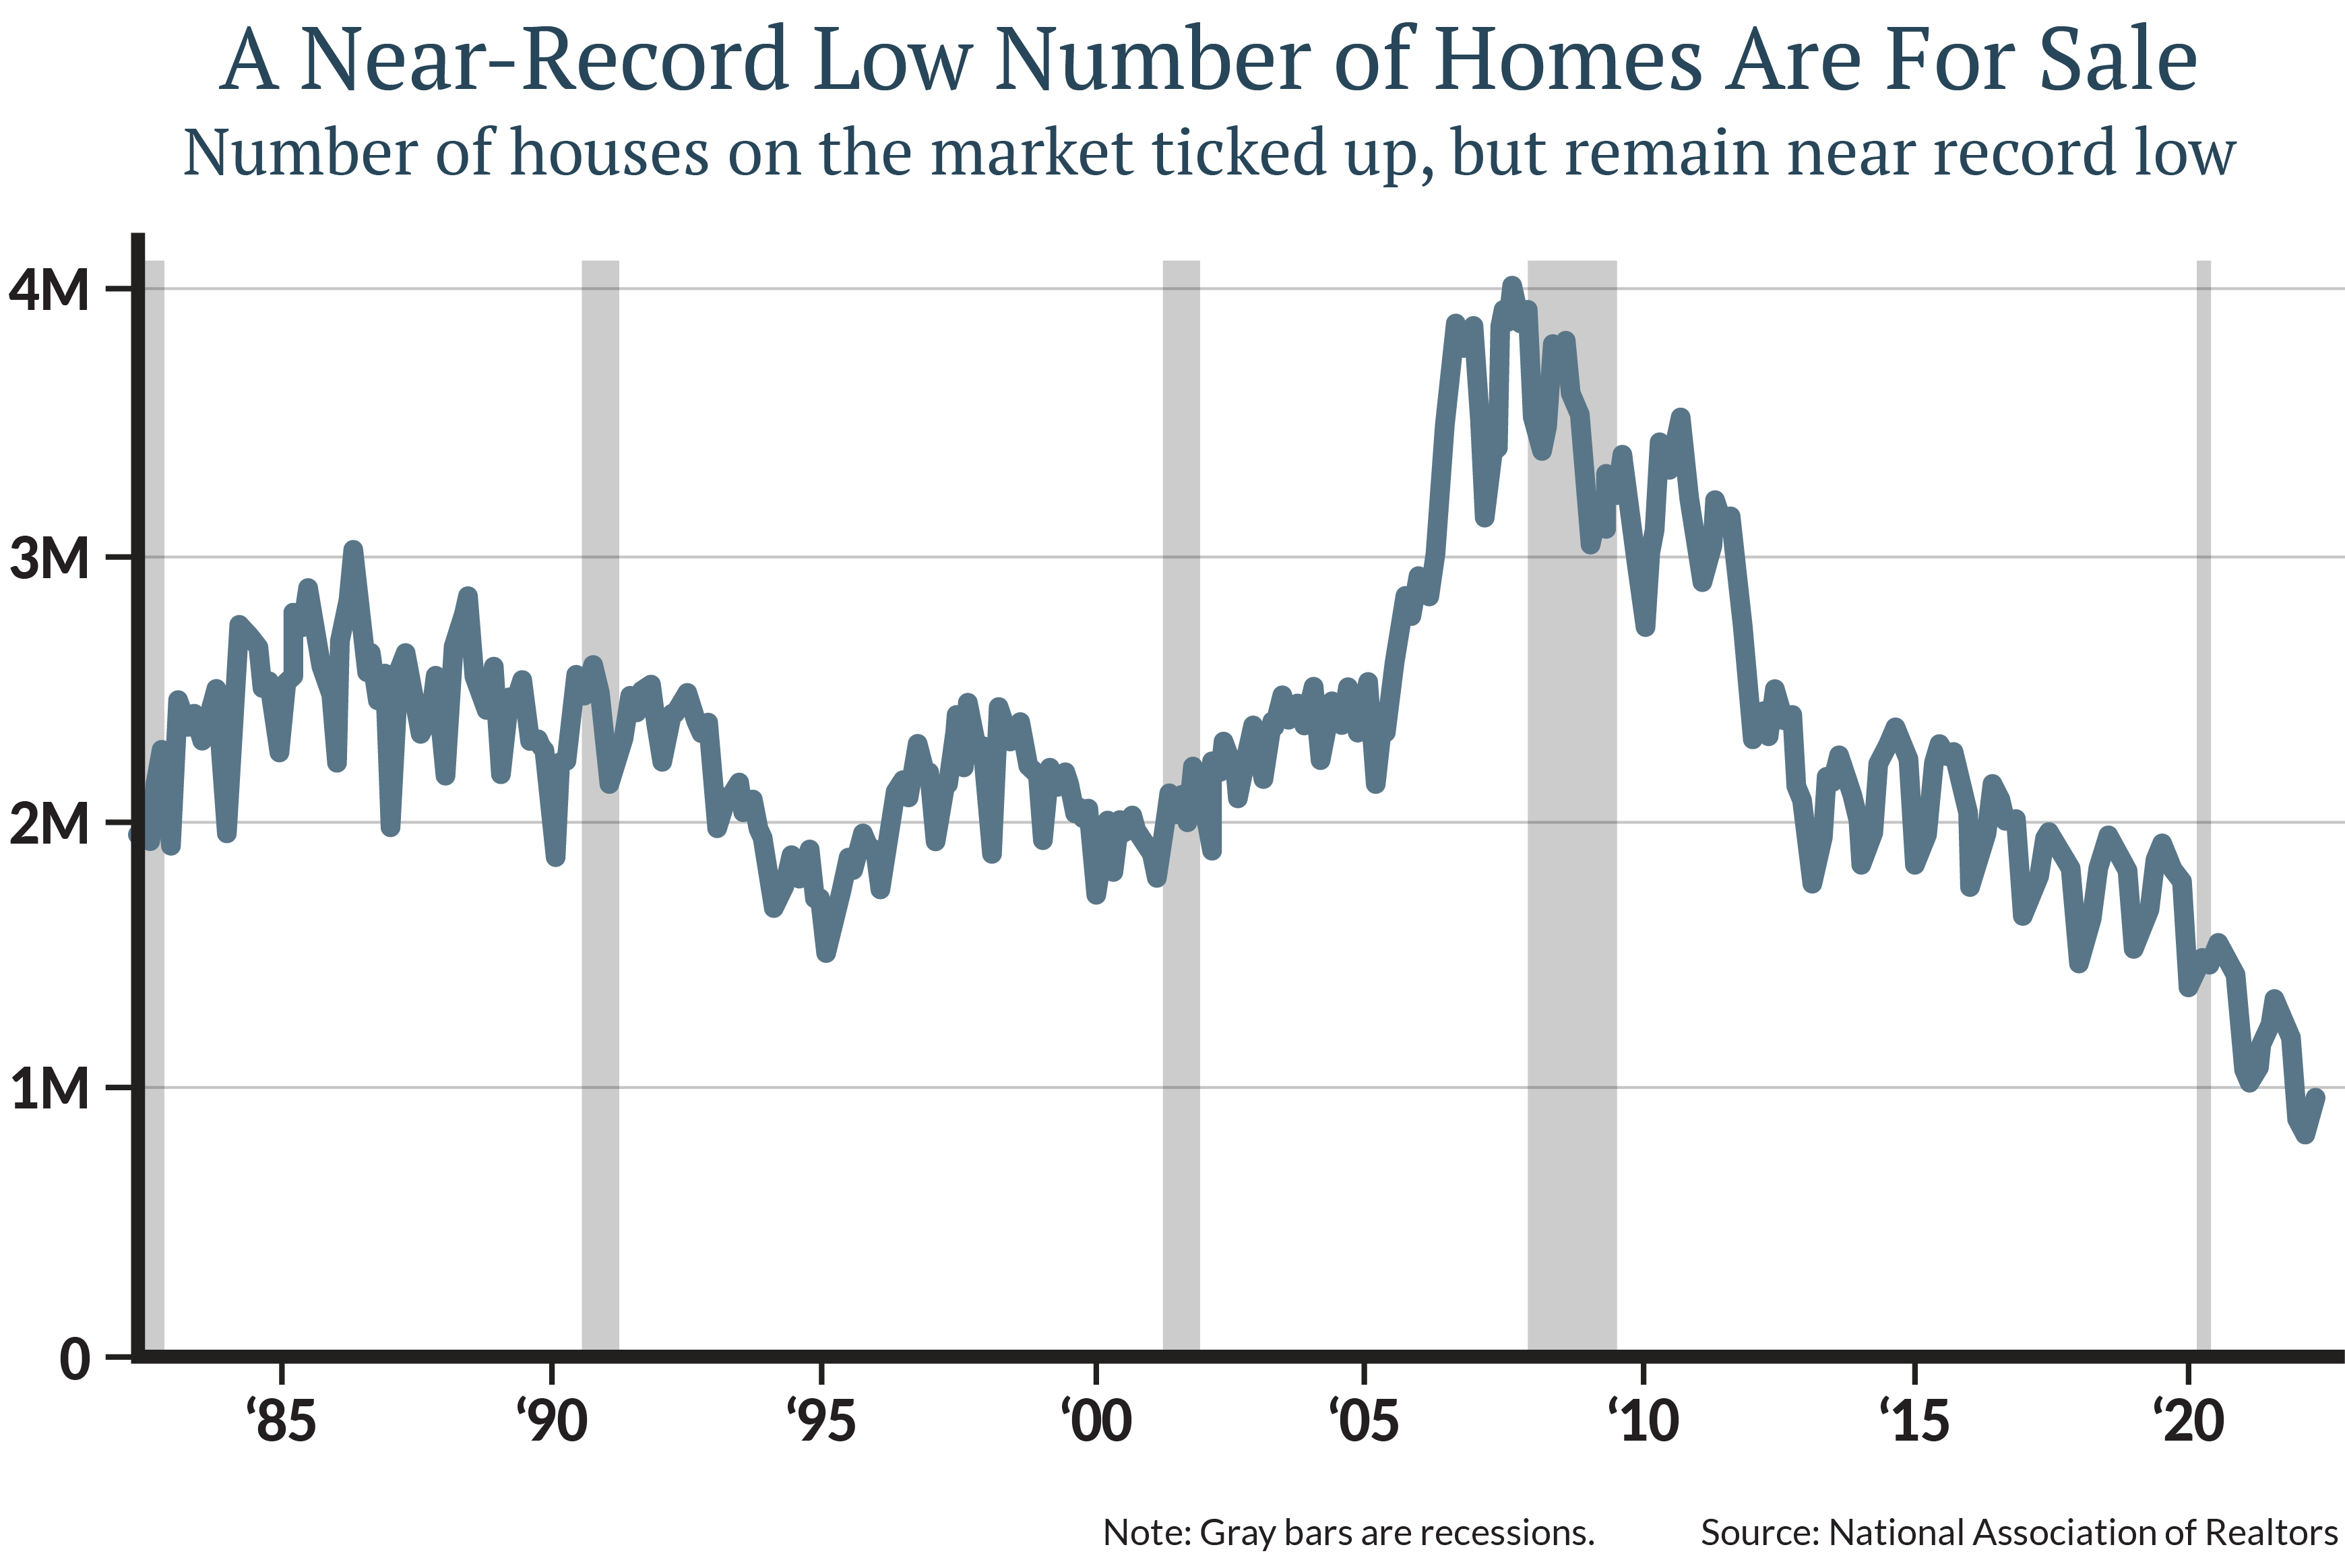 When you look at the chart you can see that we are at a decades-low level in housing supply…at a time when younger millennials are entering the housing market.